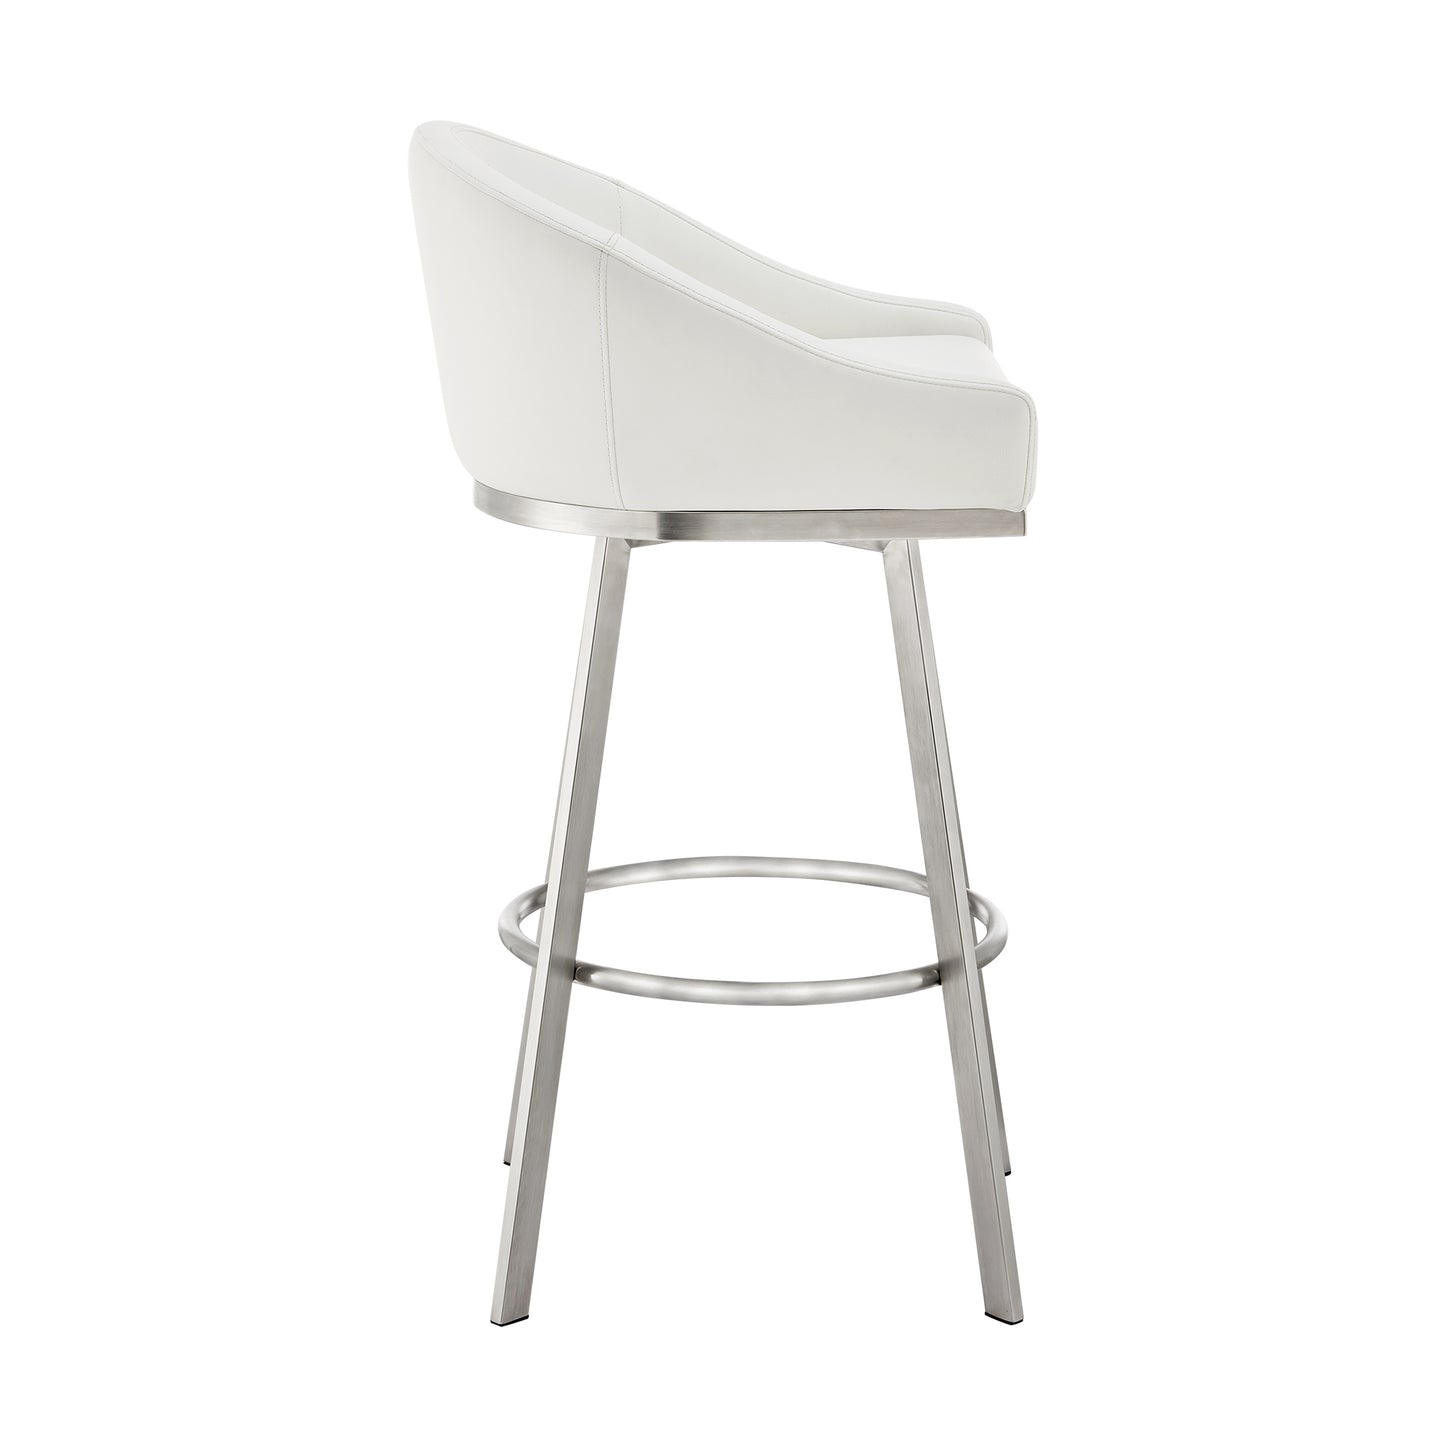 Eleanor 30" Swivel Bar Stool in Brushed Stainless Steel with White Faux Leather